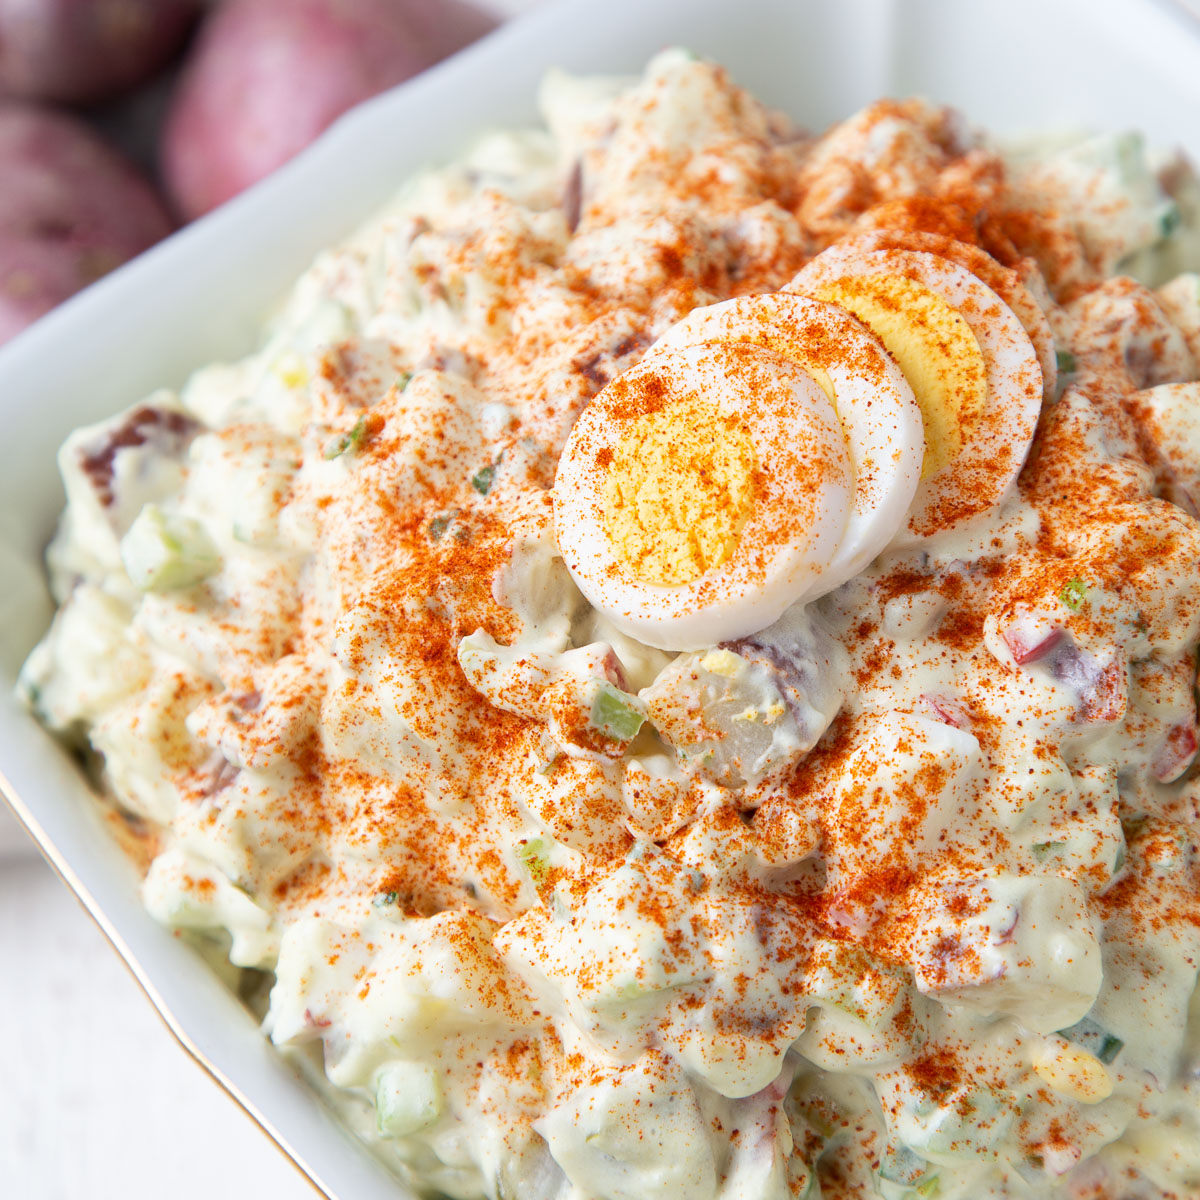 red potato salad topped with hard boiled eggs and paprika in a white dish.